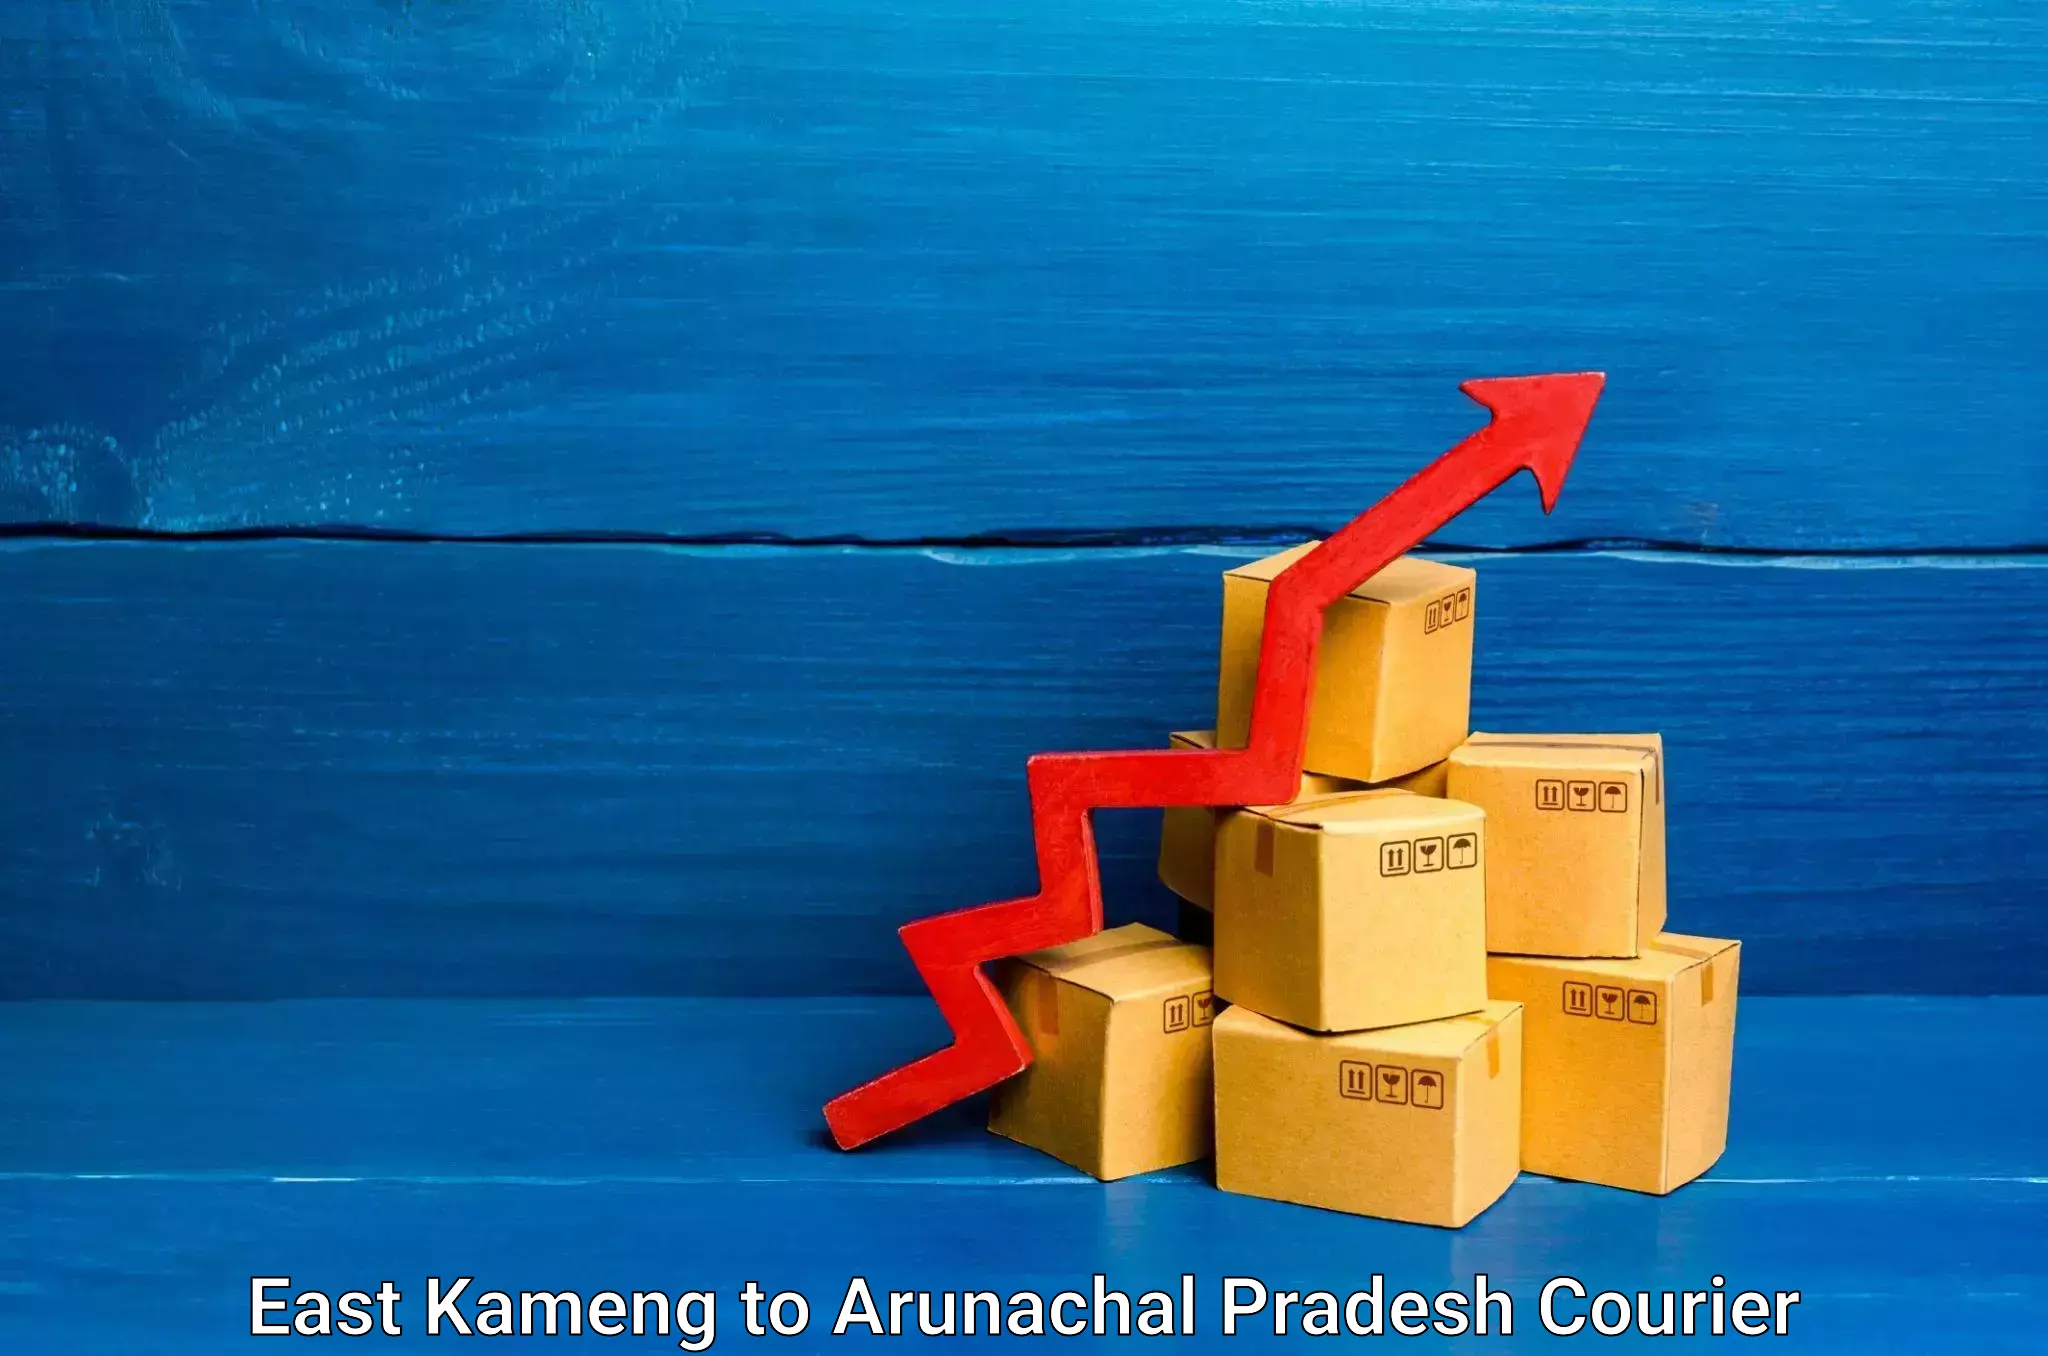 Same-day delivery solutions in East Kameng to Upper Subansiri